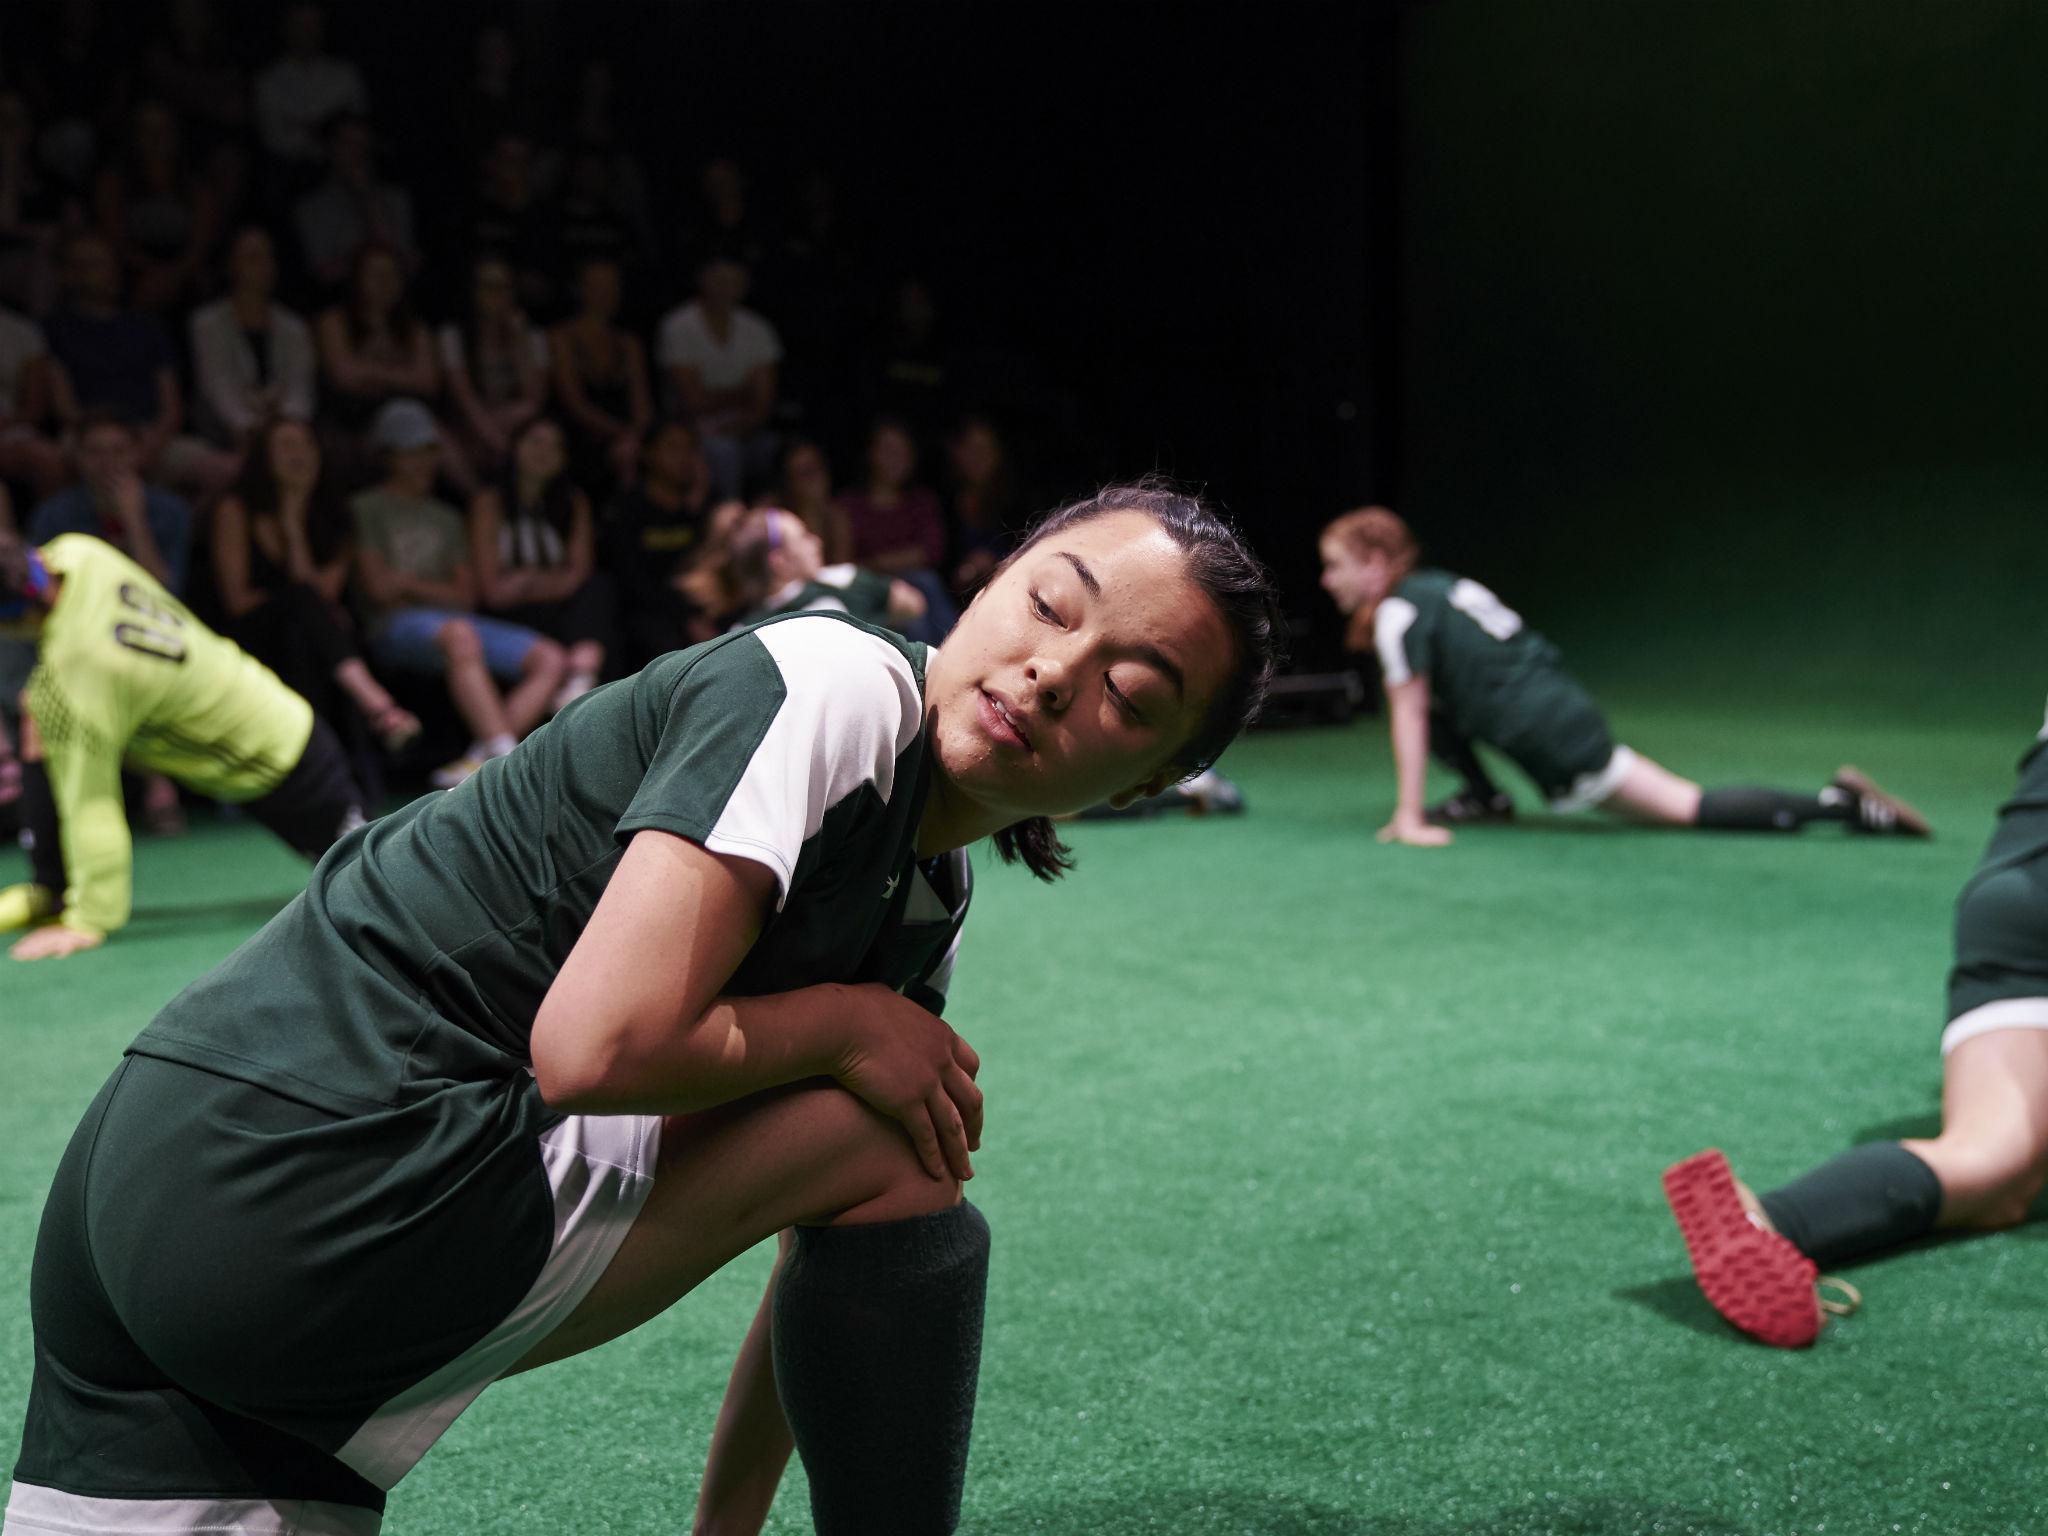 Nine girls on the football pitch, testing themselves and creating their identities